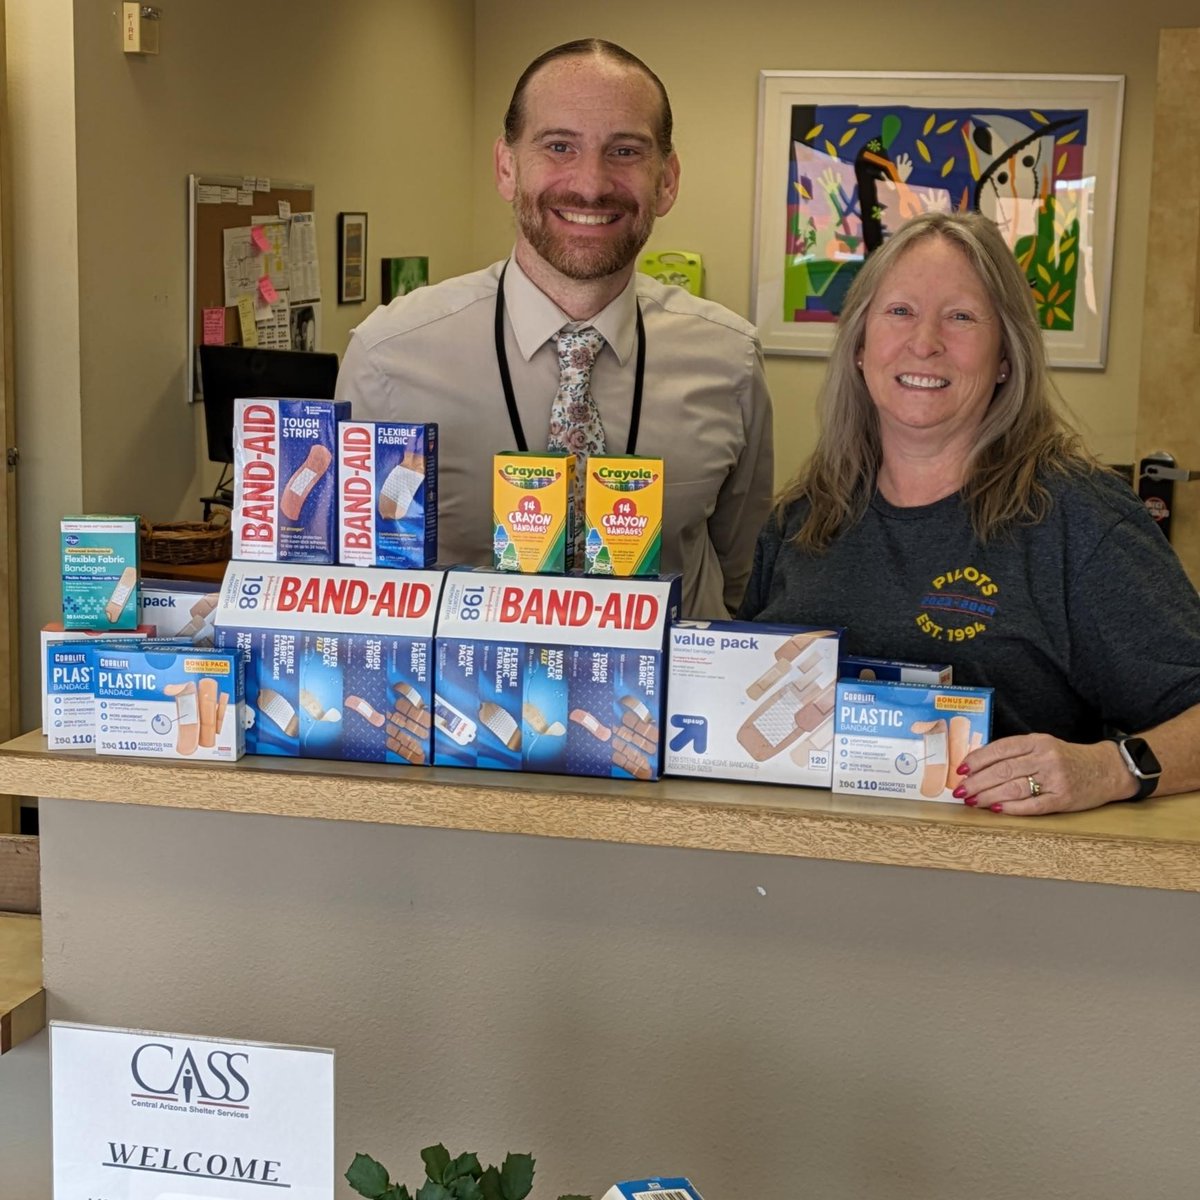 Thank you to Mrs. Cunningham and the @SonoranSky PILOTS Community Outreach team for putting together this great band-aide drive. It was incredibly thoughtful for these sixth graders to think of us and collect these much needed items. Let us know if you'd like to host a drive